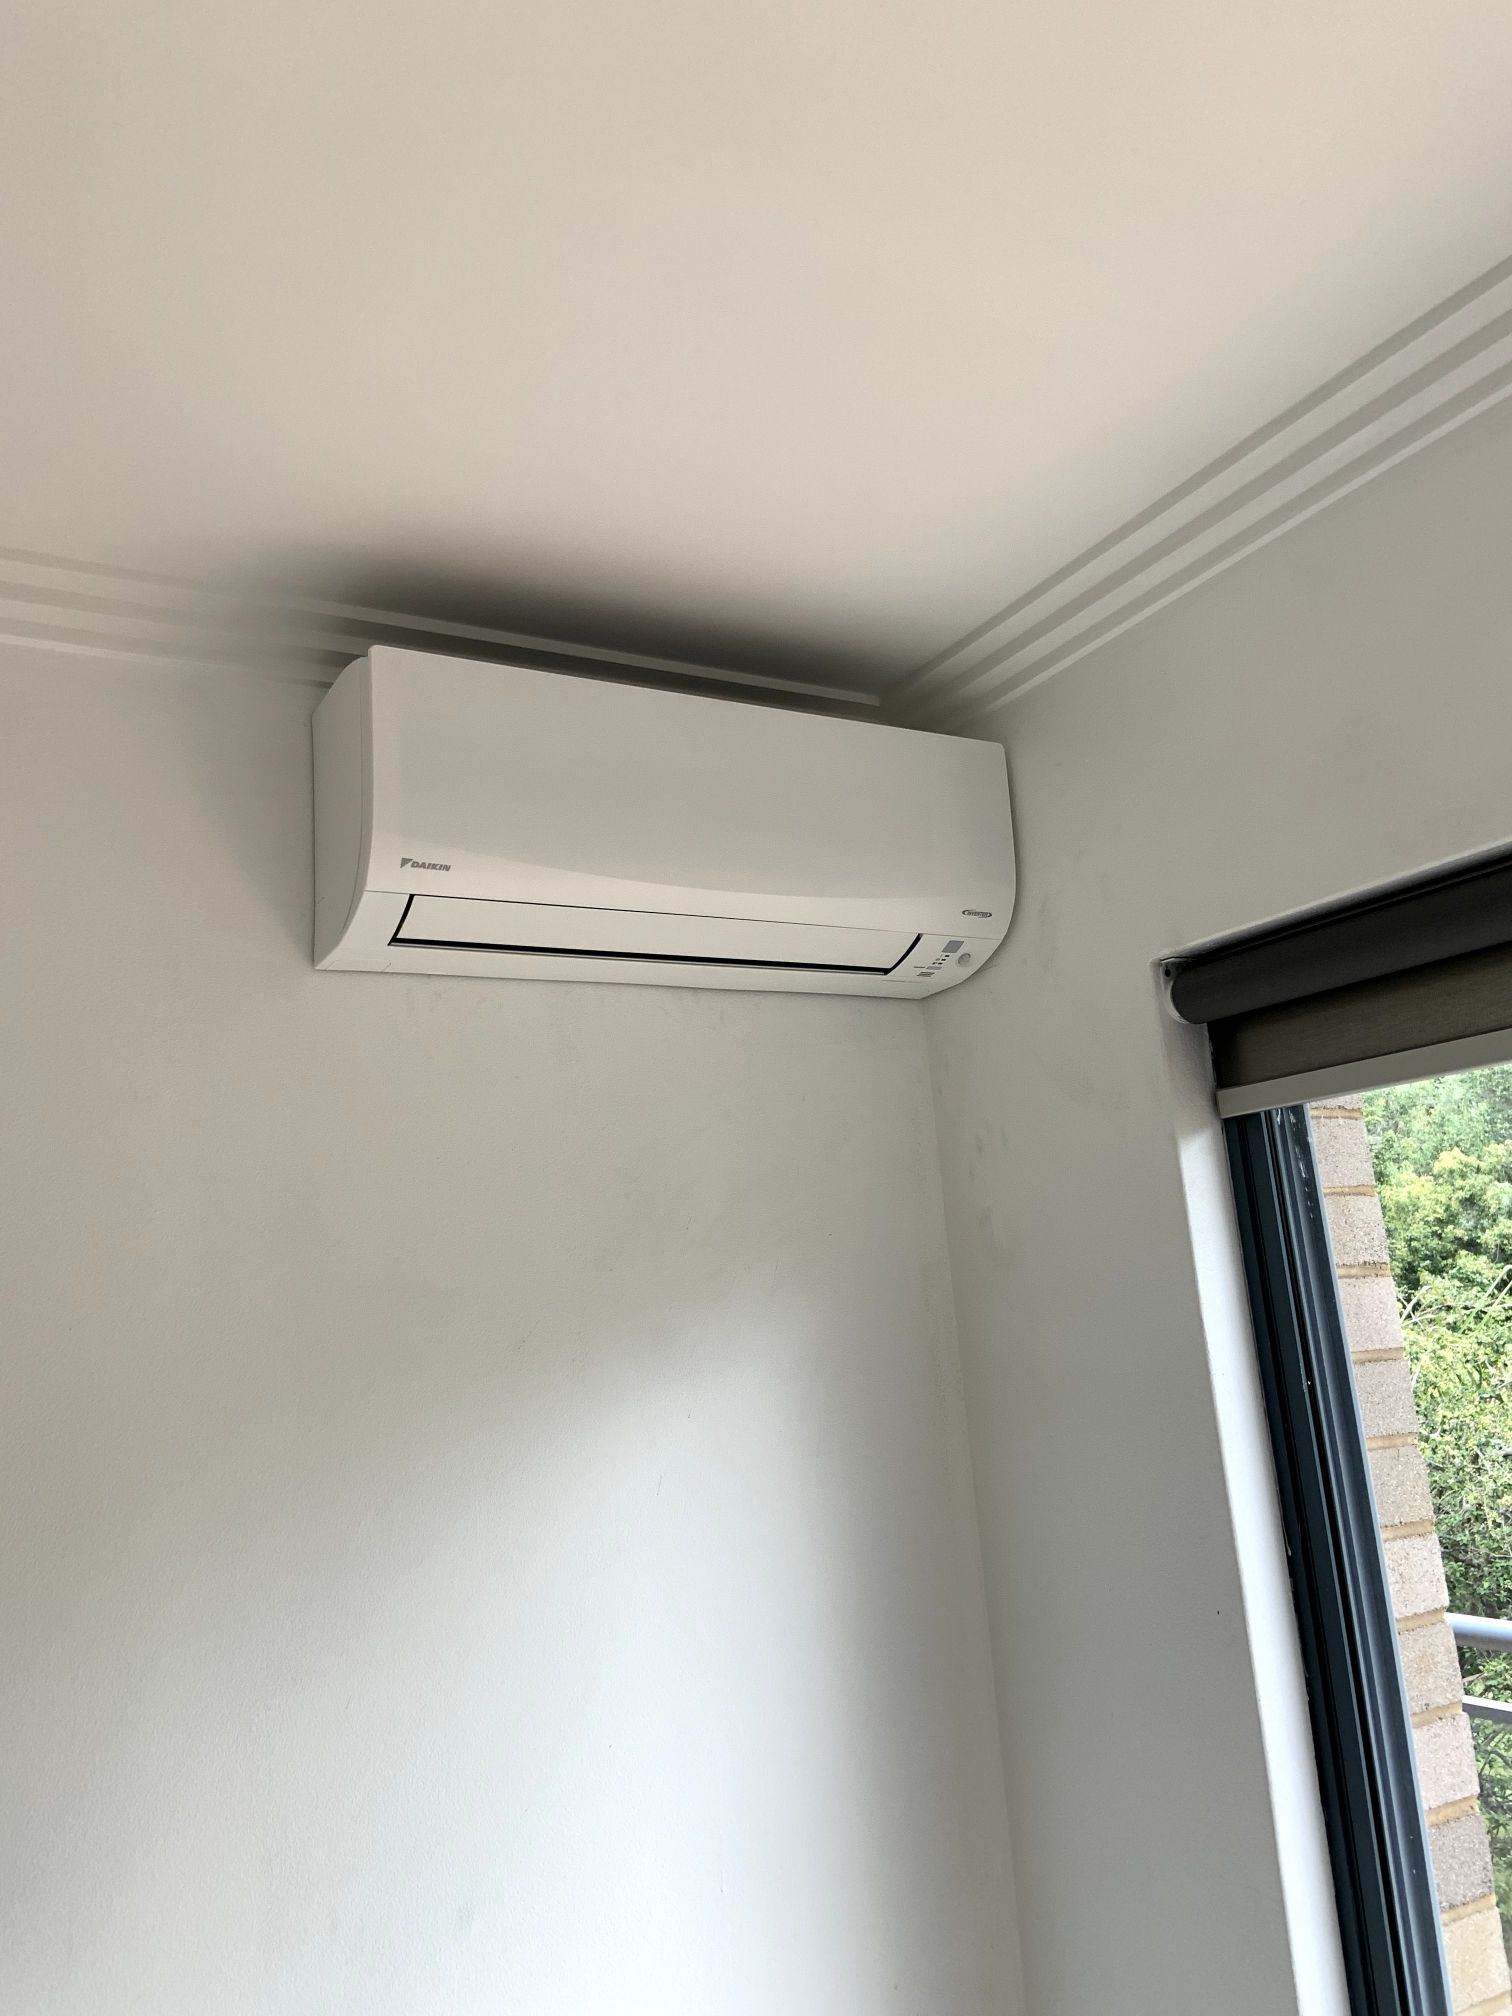  air conditioners for home